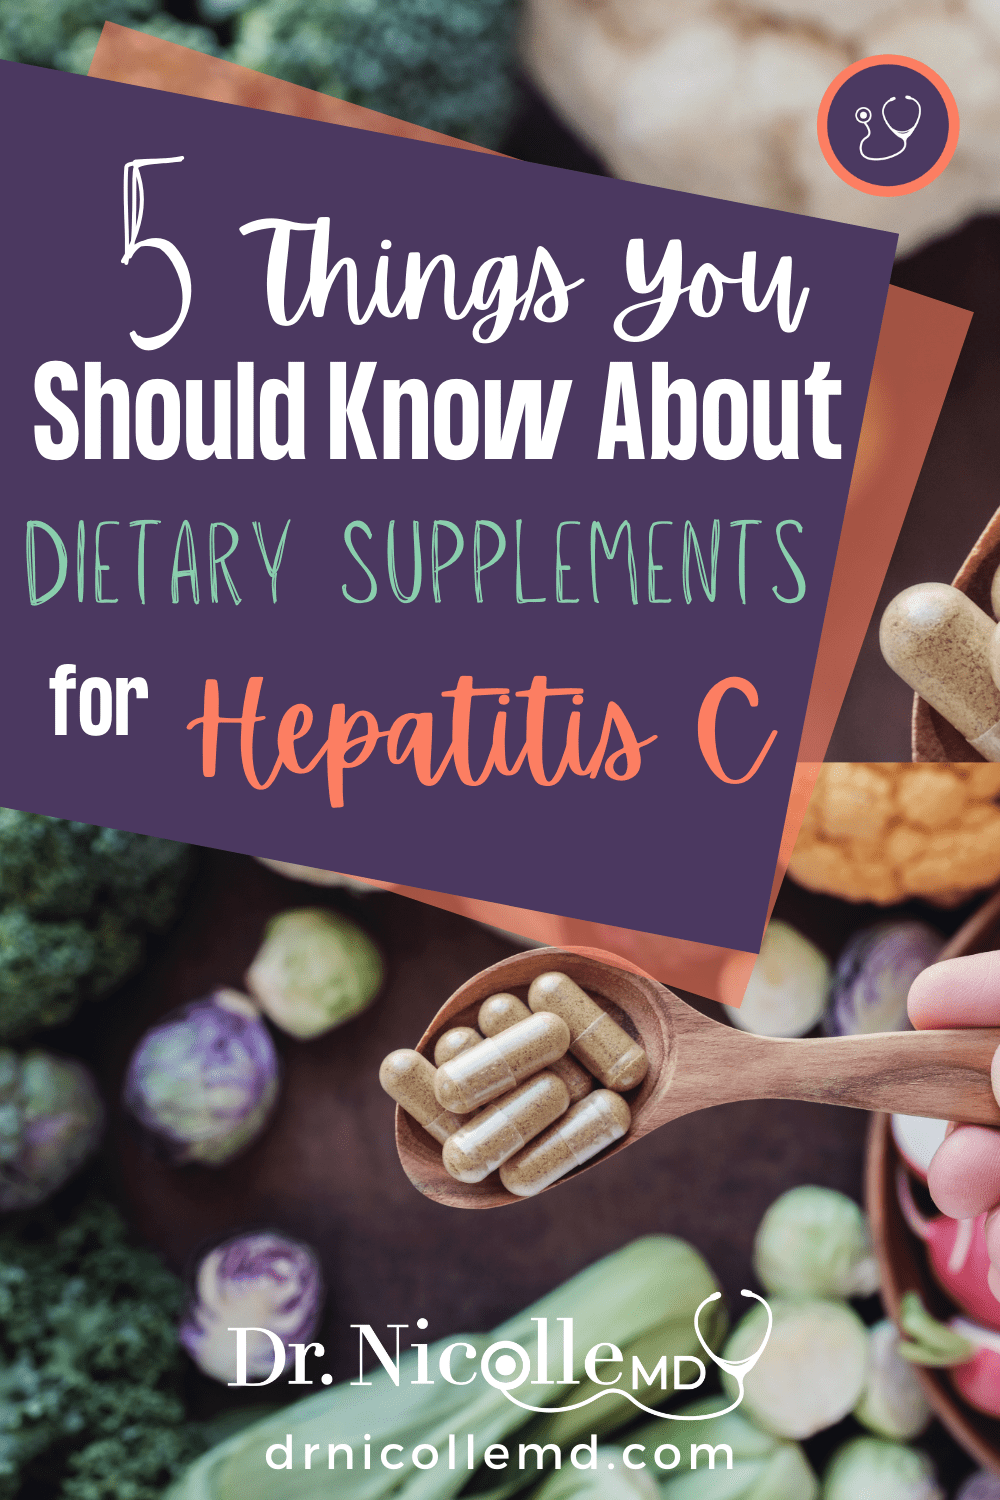 5 Things You Should Know About Dietary Supplements for Hepatitis C